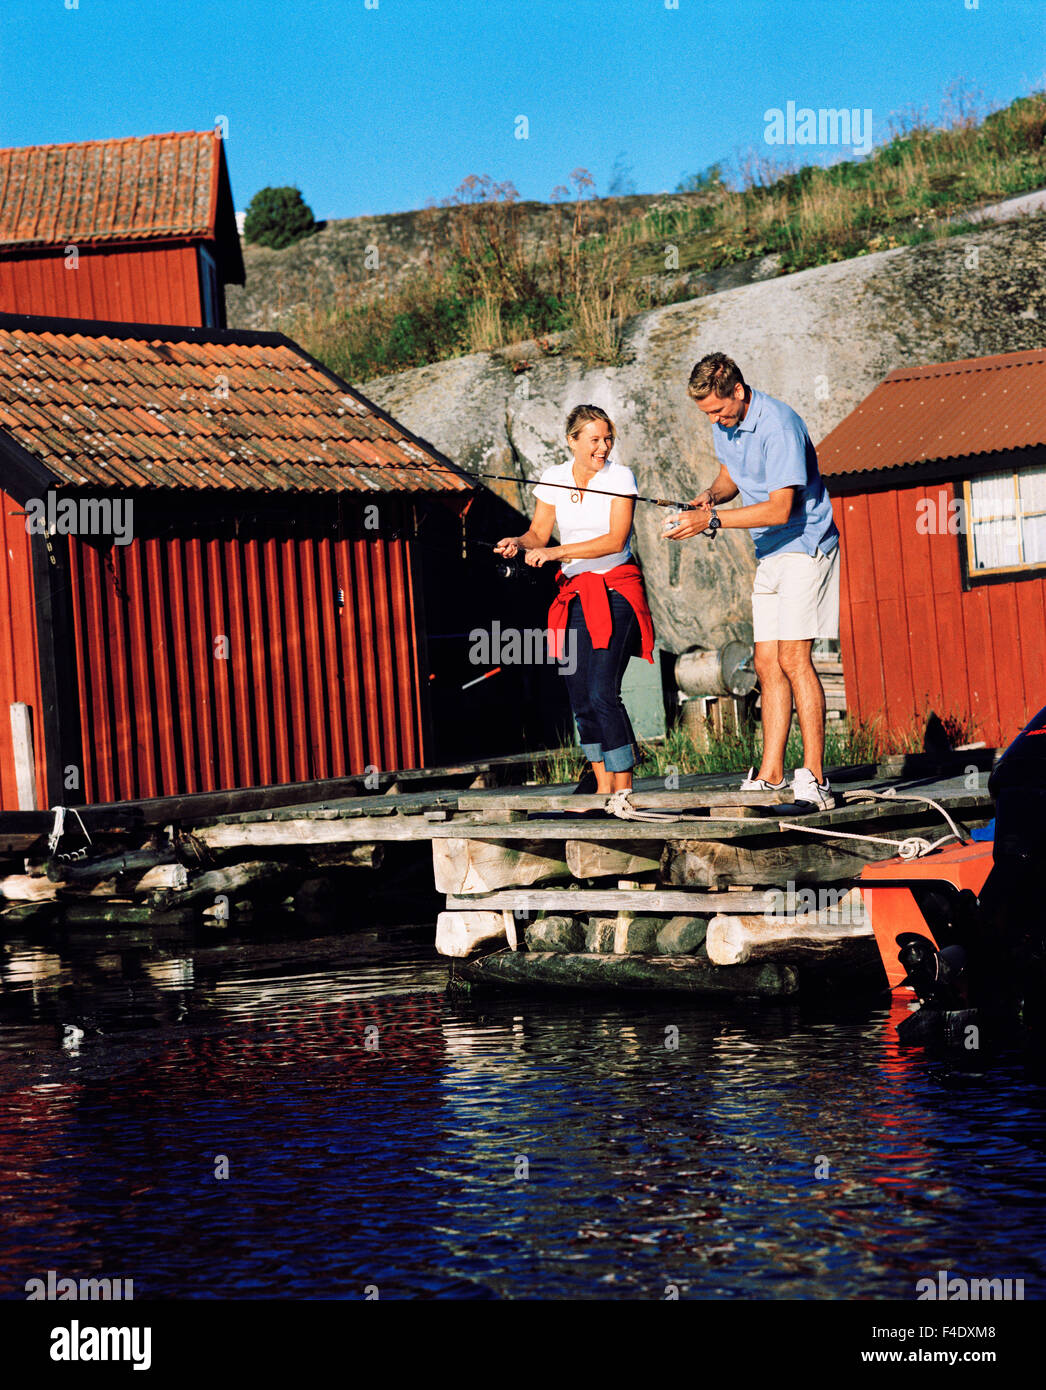 A woman and a man fishing, Harstena, Sweden. Stock Photo